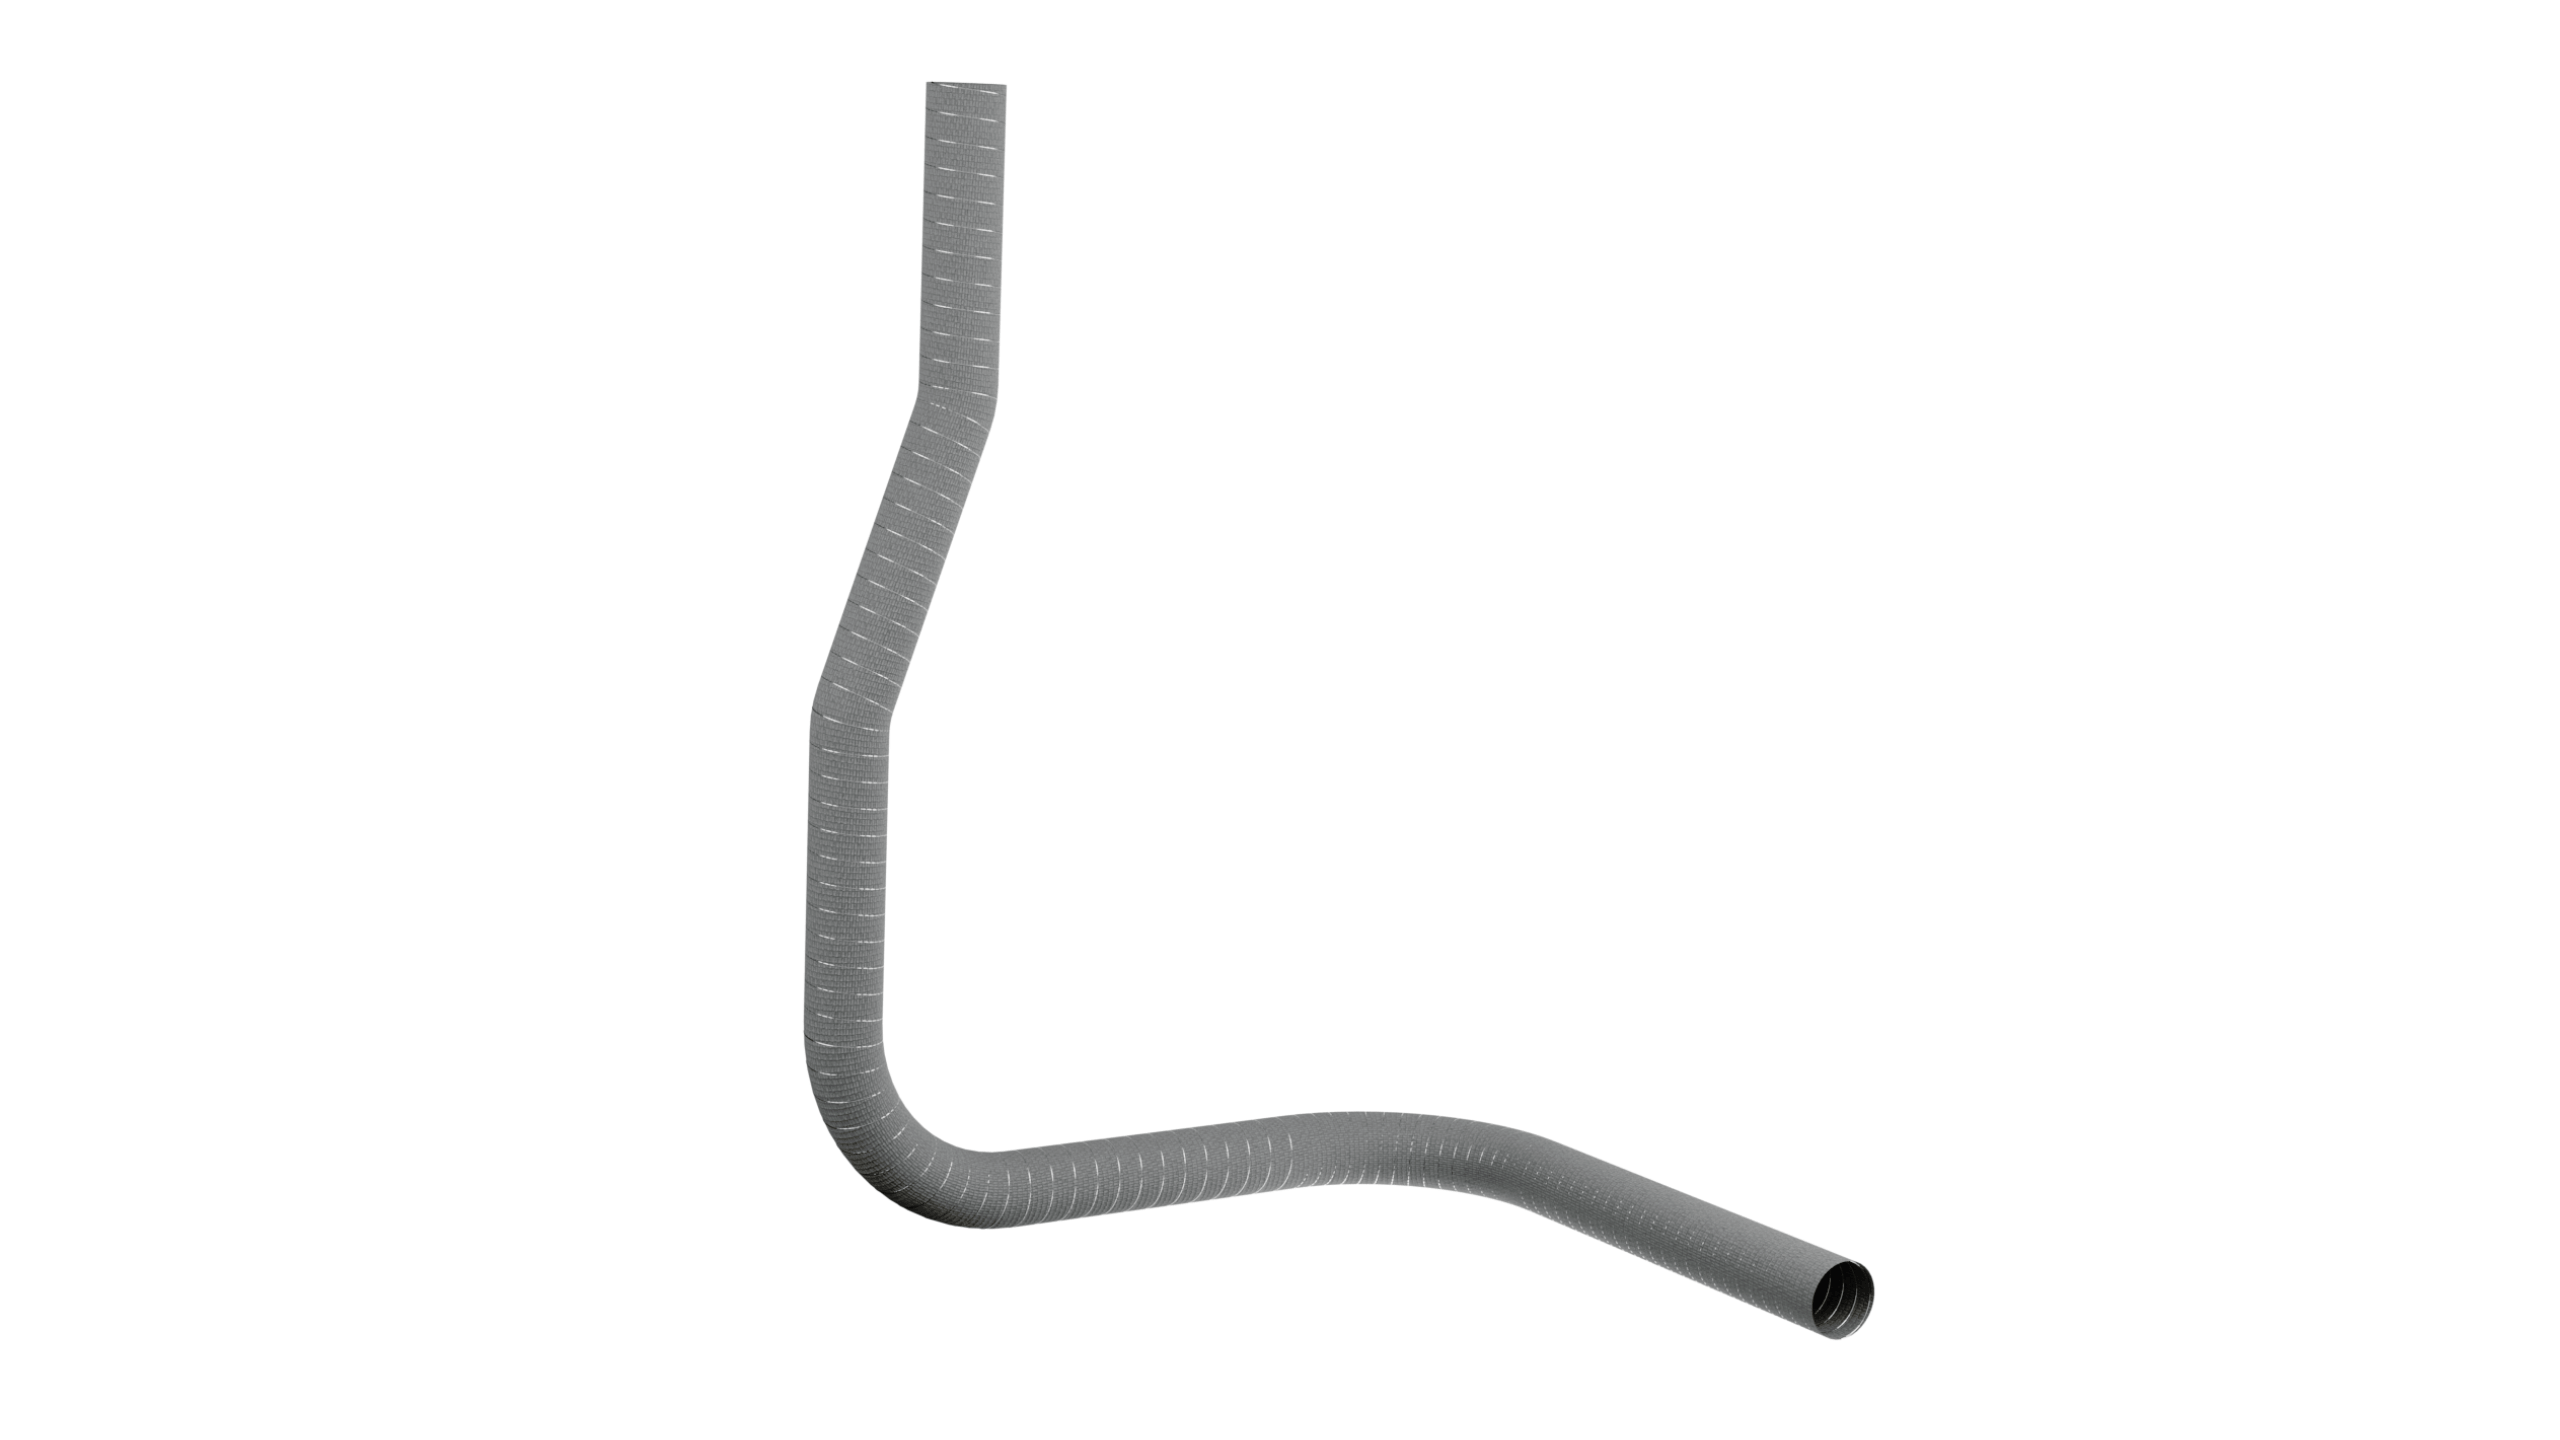 Flexible Ducts (Hoses)